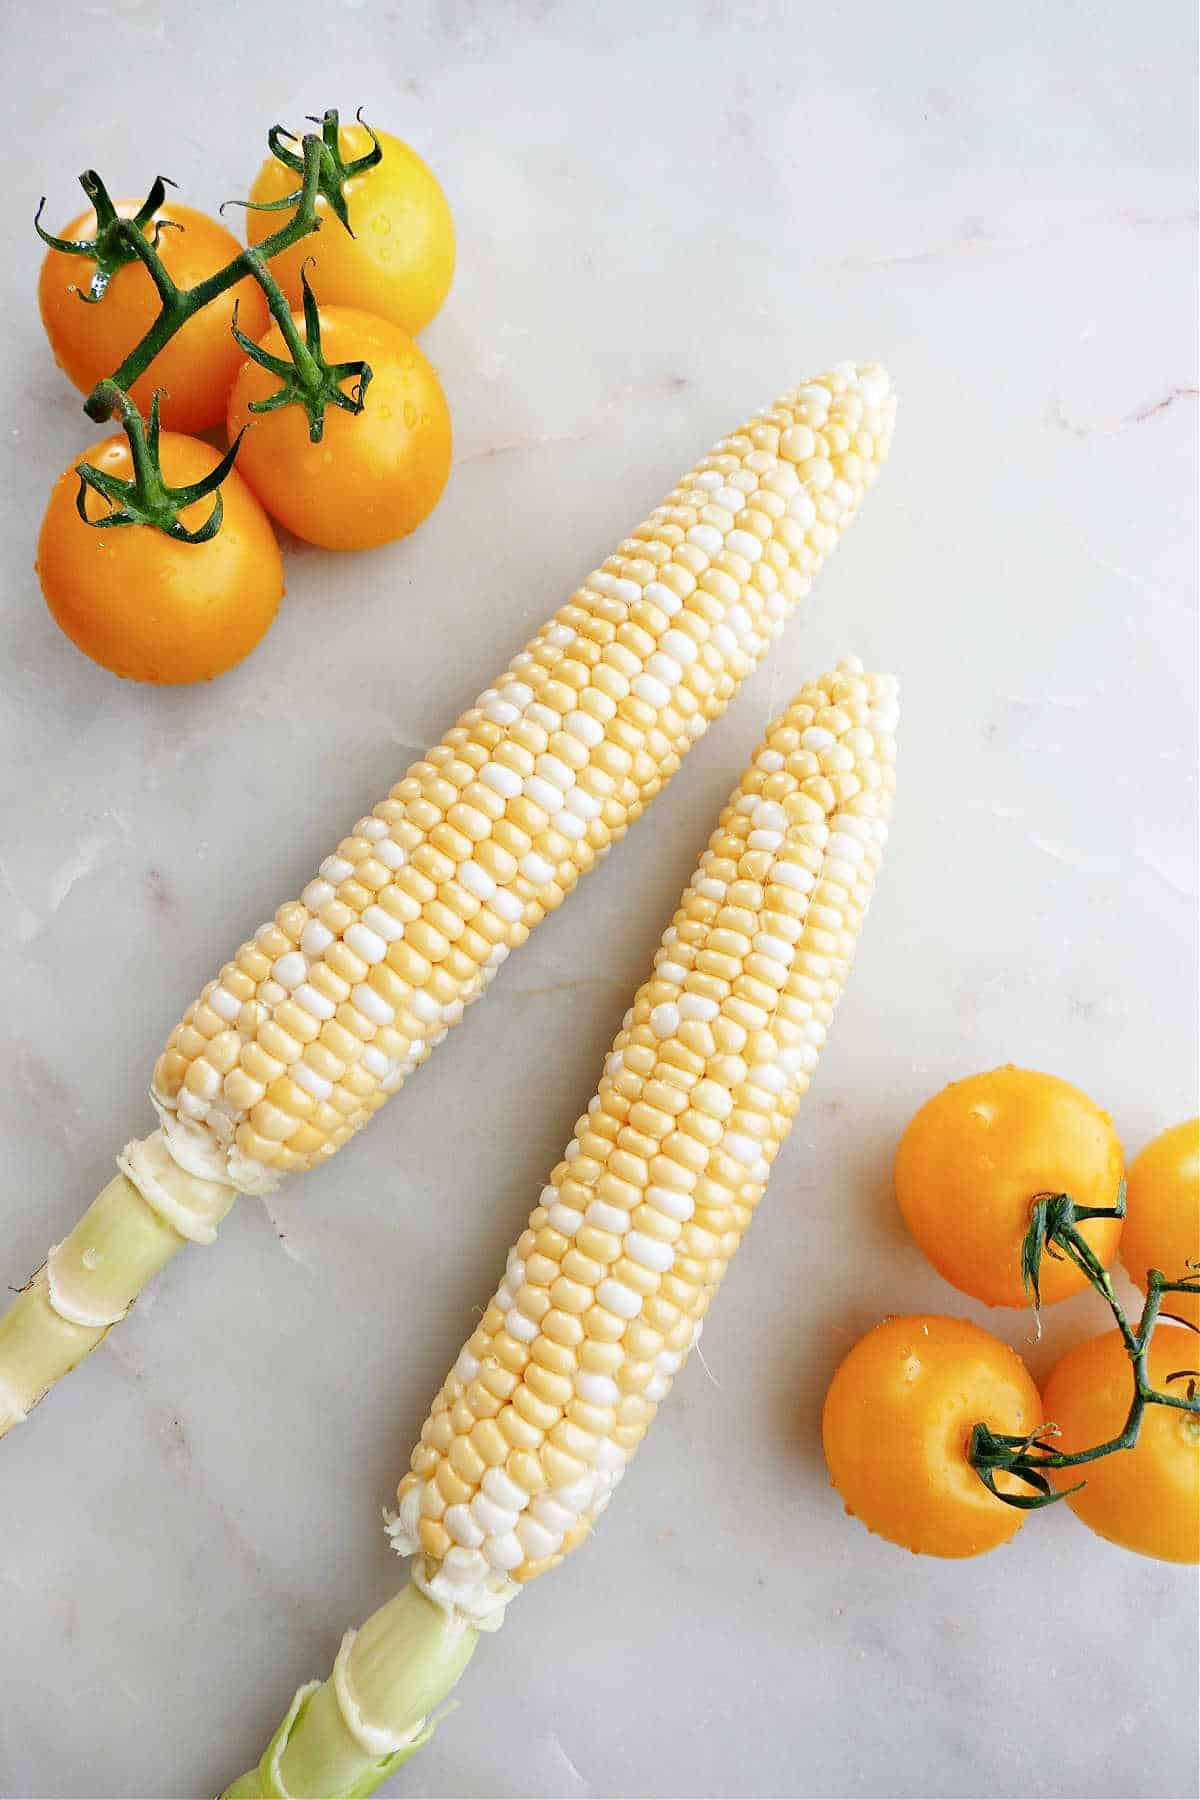 corn on the cob and yellow tomatoes spread out next to each other on a counter